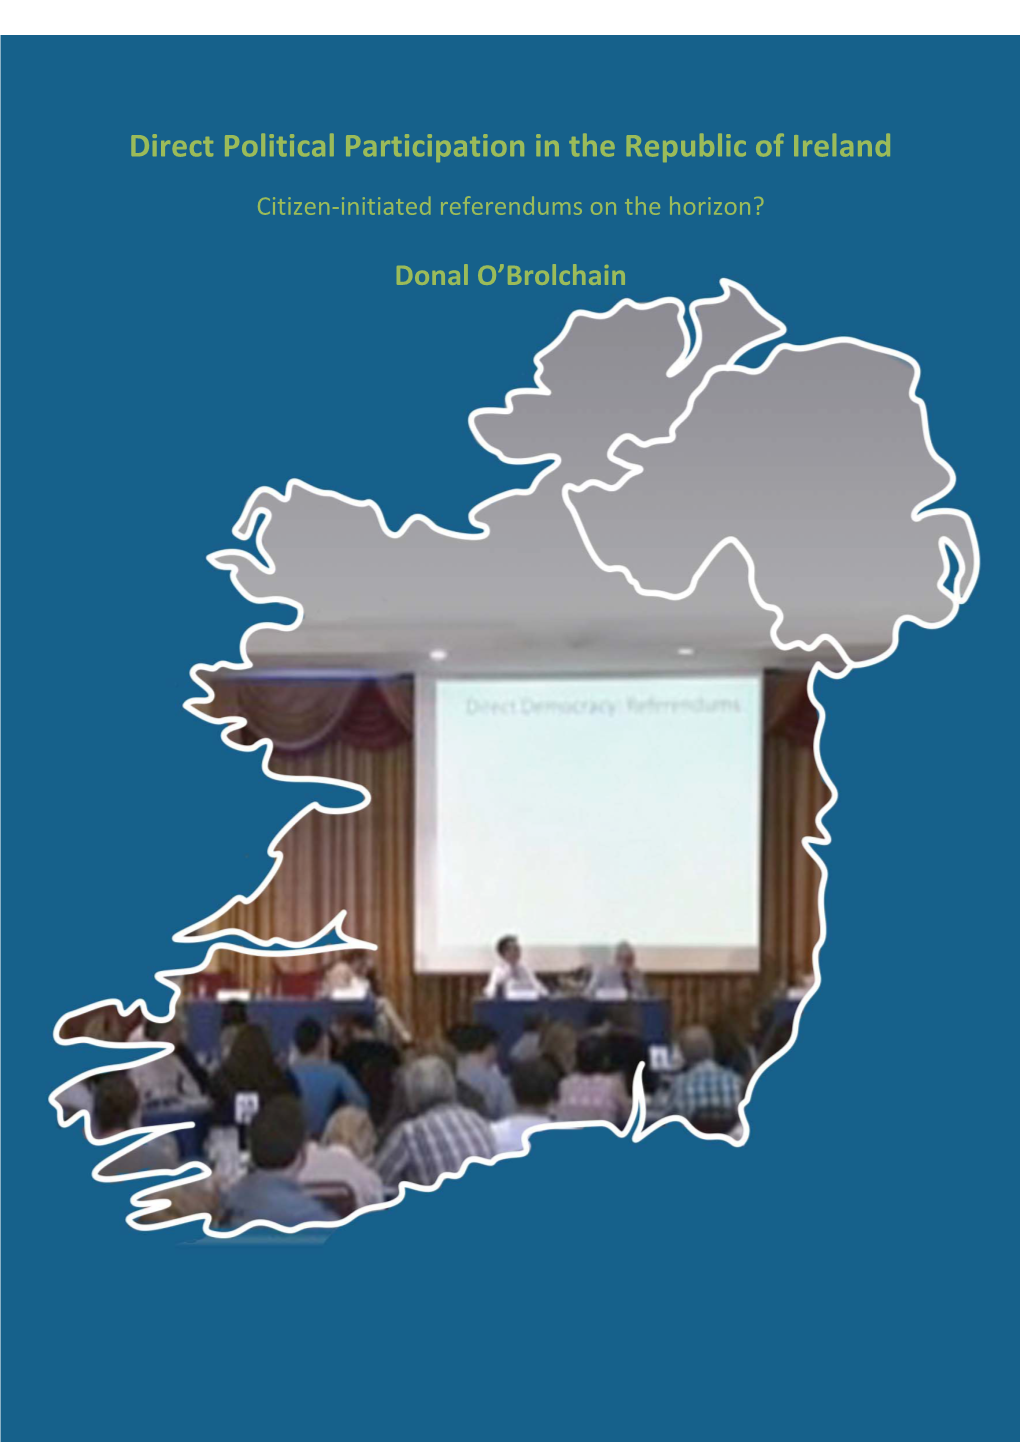 Direct Political Participation in the Republic of Ireland ‐ 20 November 2013